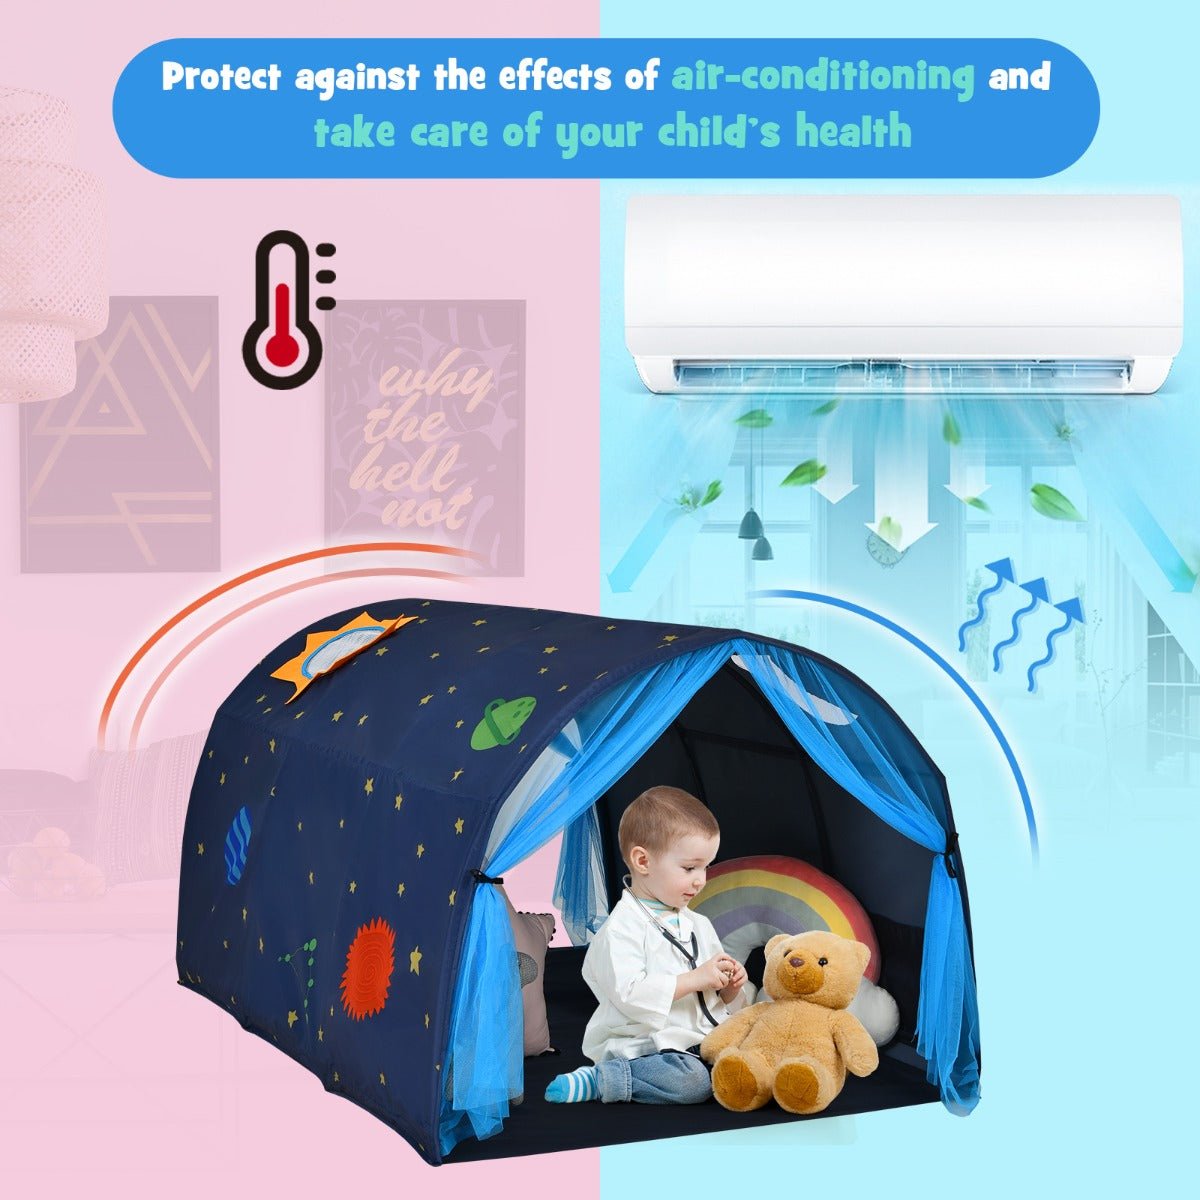 Bedtime Bliss: Twin Sleeping Tent Playhouse with Carry Bag